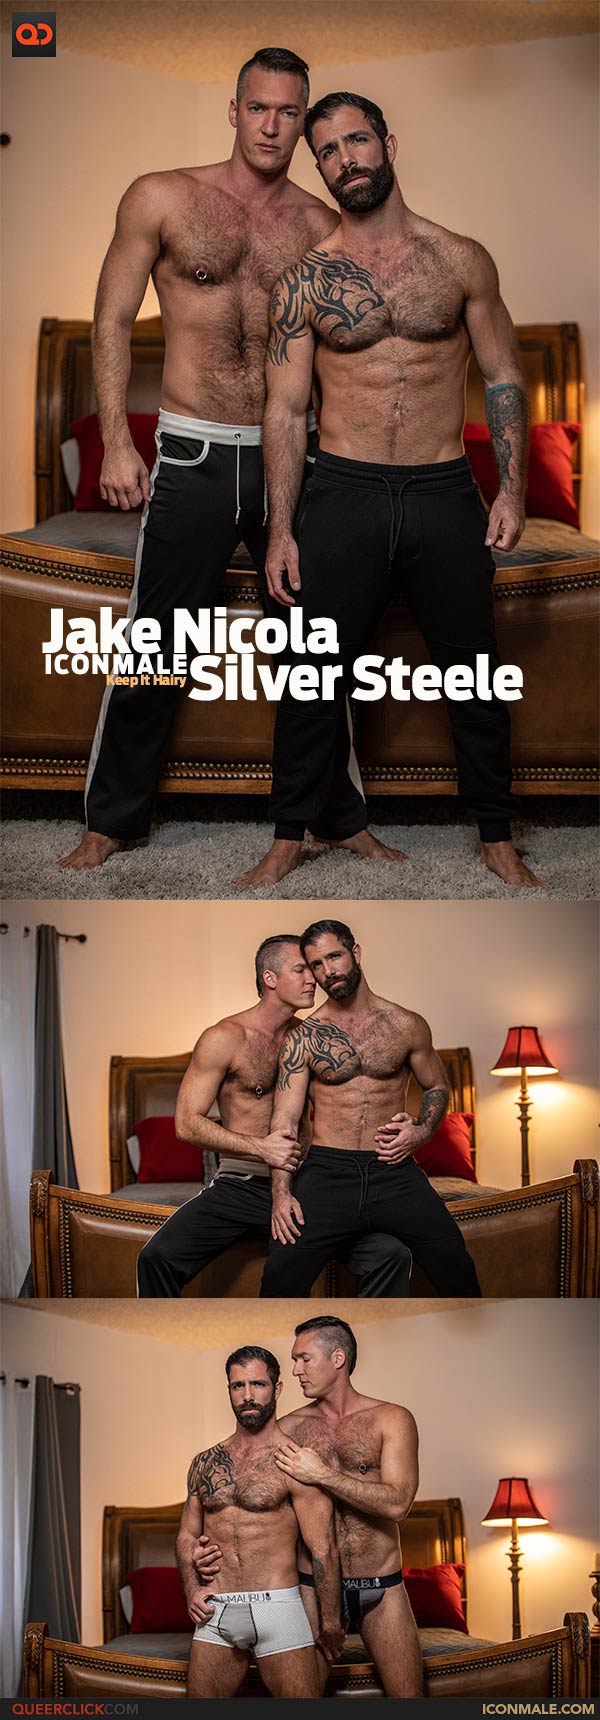 IconMale: Jake Nicola and Silver Steele